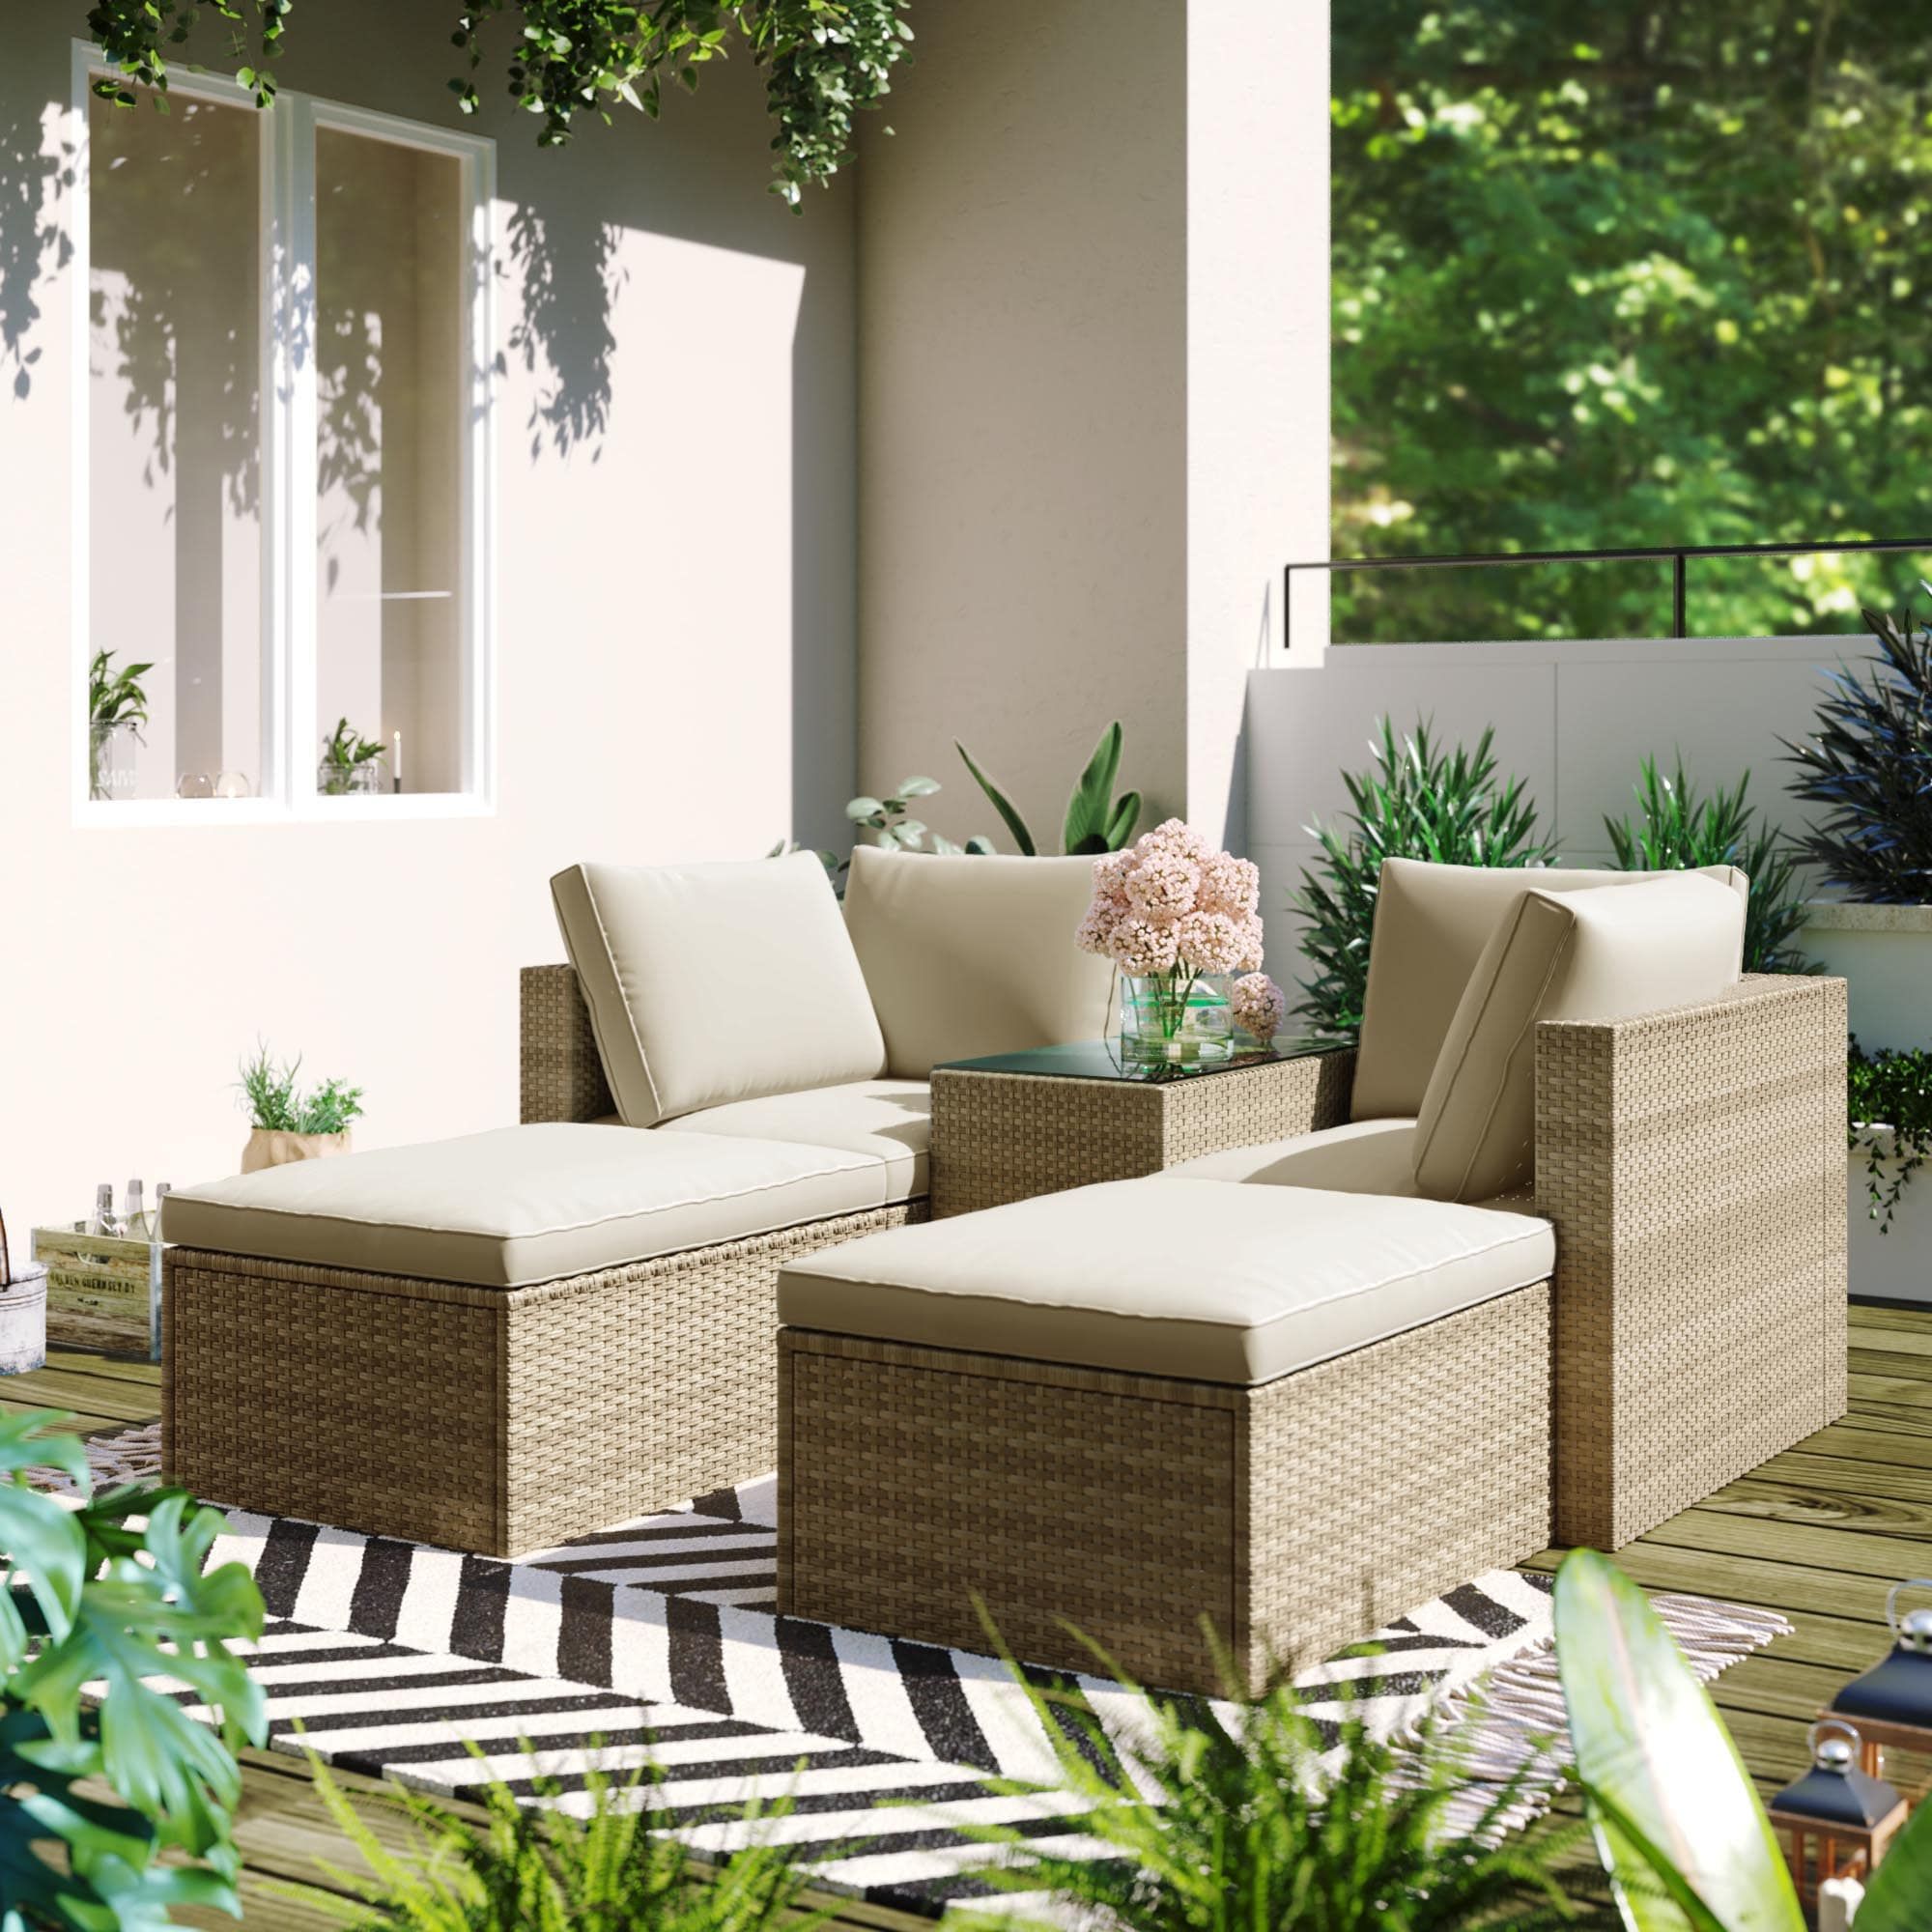 Es Diy Palm City 5 Piece Rattan Patio Conversation Set With Off White  Cushions In The Patio Conversation Sets Department At Lowes Pertaining To 5 Piece Outdoor Patio Furniture Set (View 11 of 15)